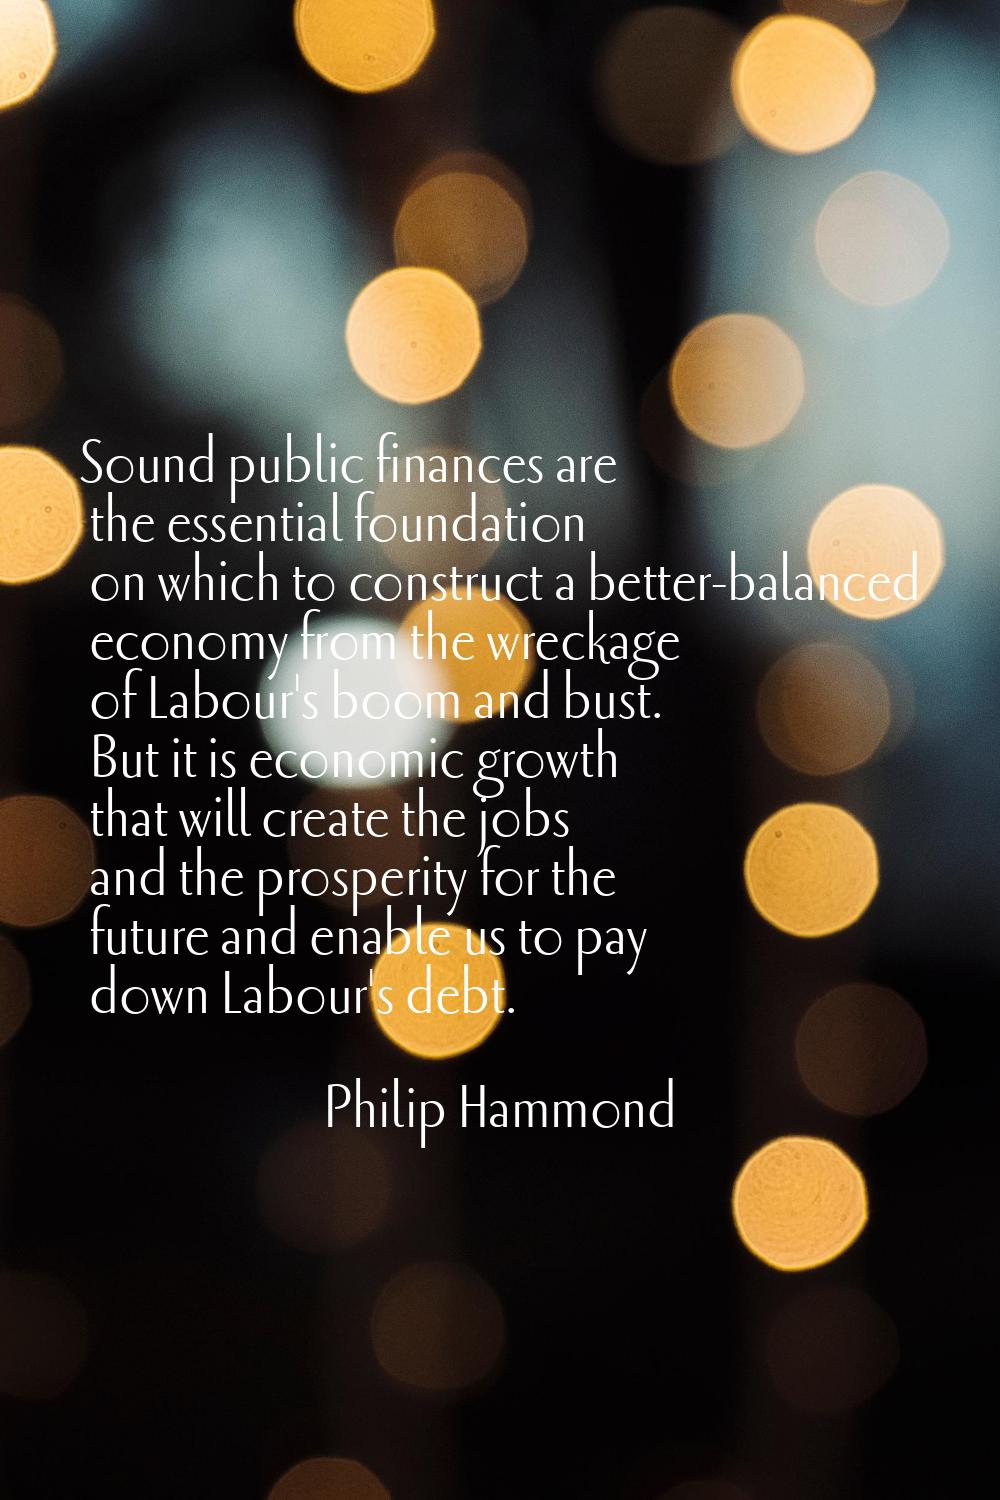 Sound public finances are the essential foundation on which to construct a better-balanced economy 